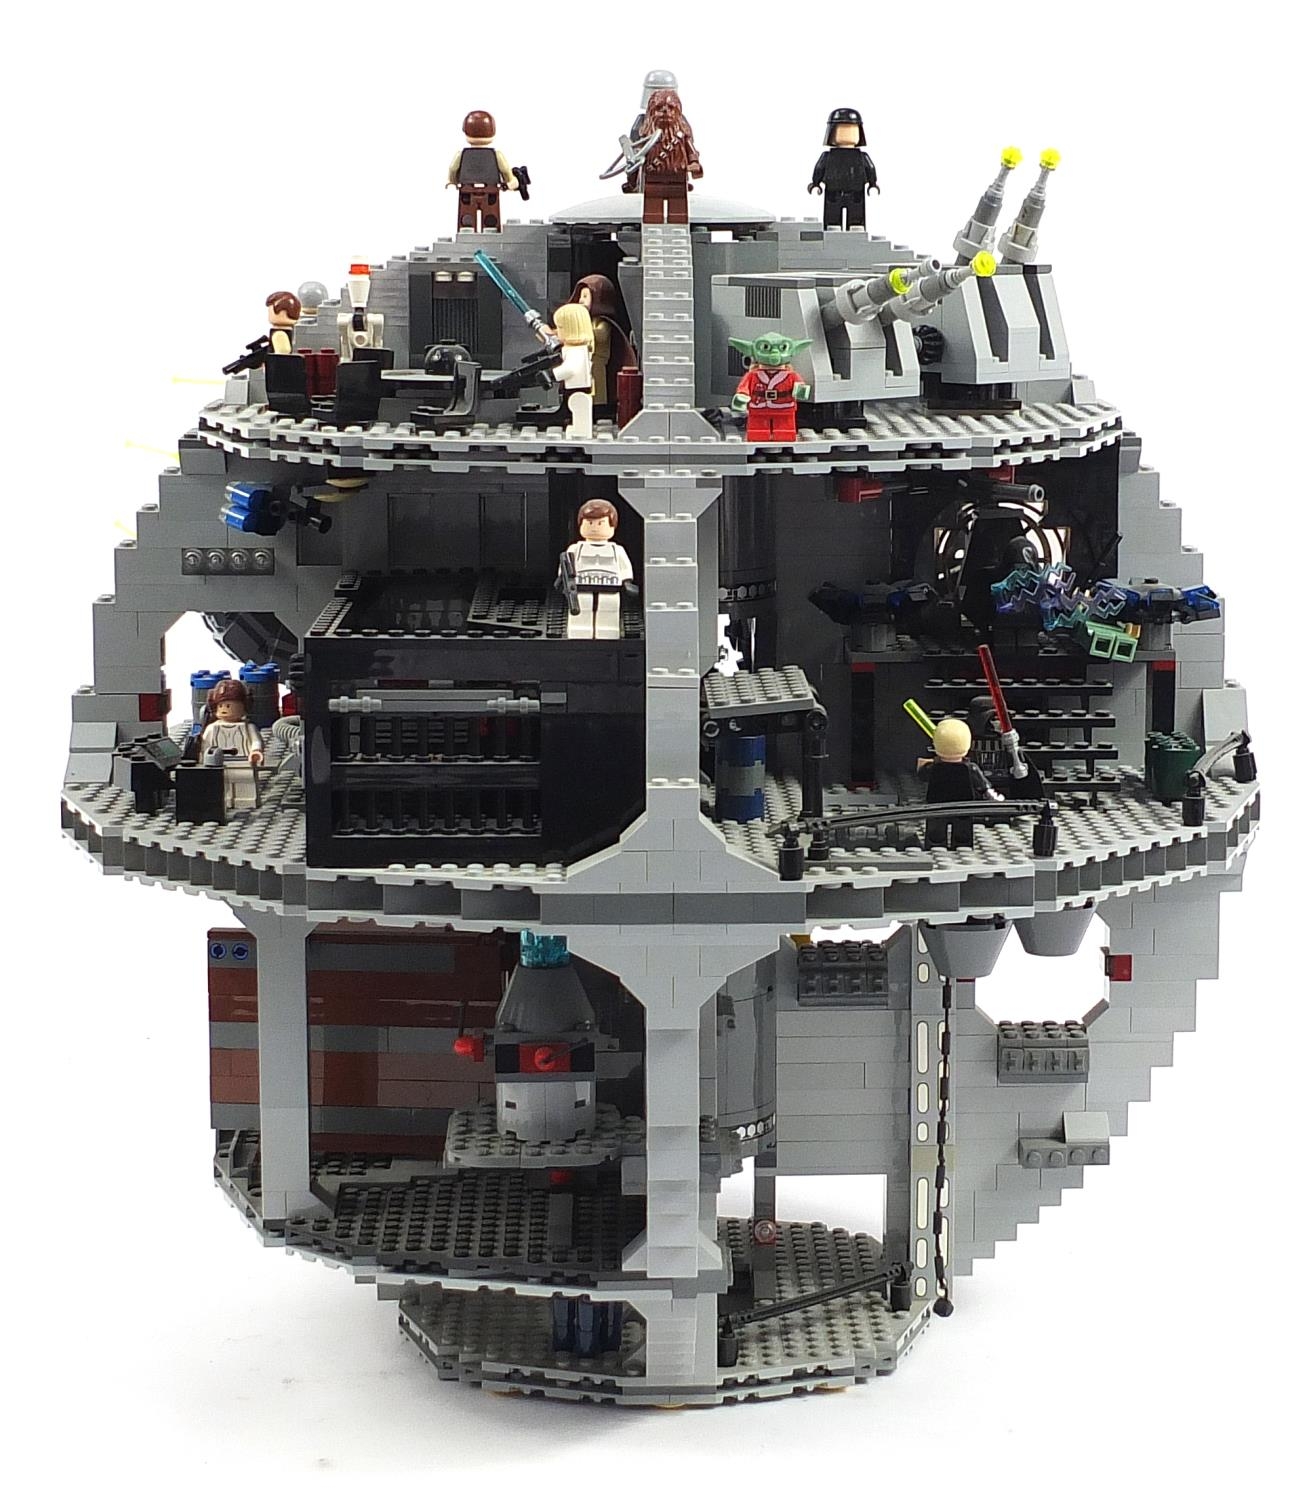 Completed Lego Star Wars Death Star with instructions no 10188, 41cm high - Image 4 of 7